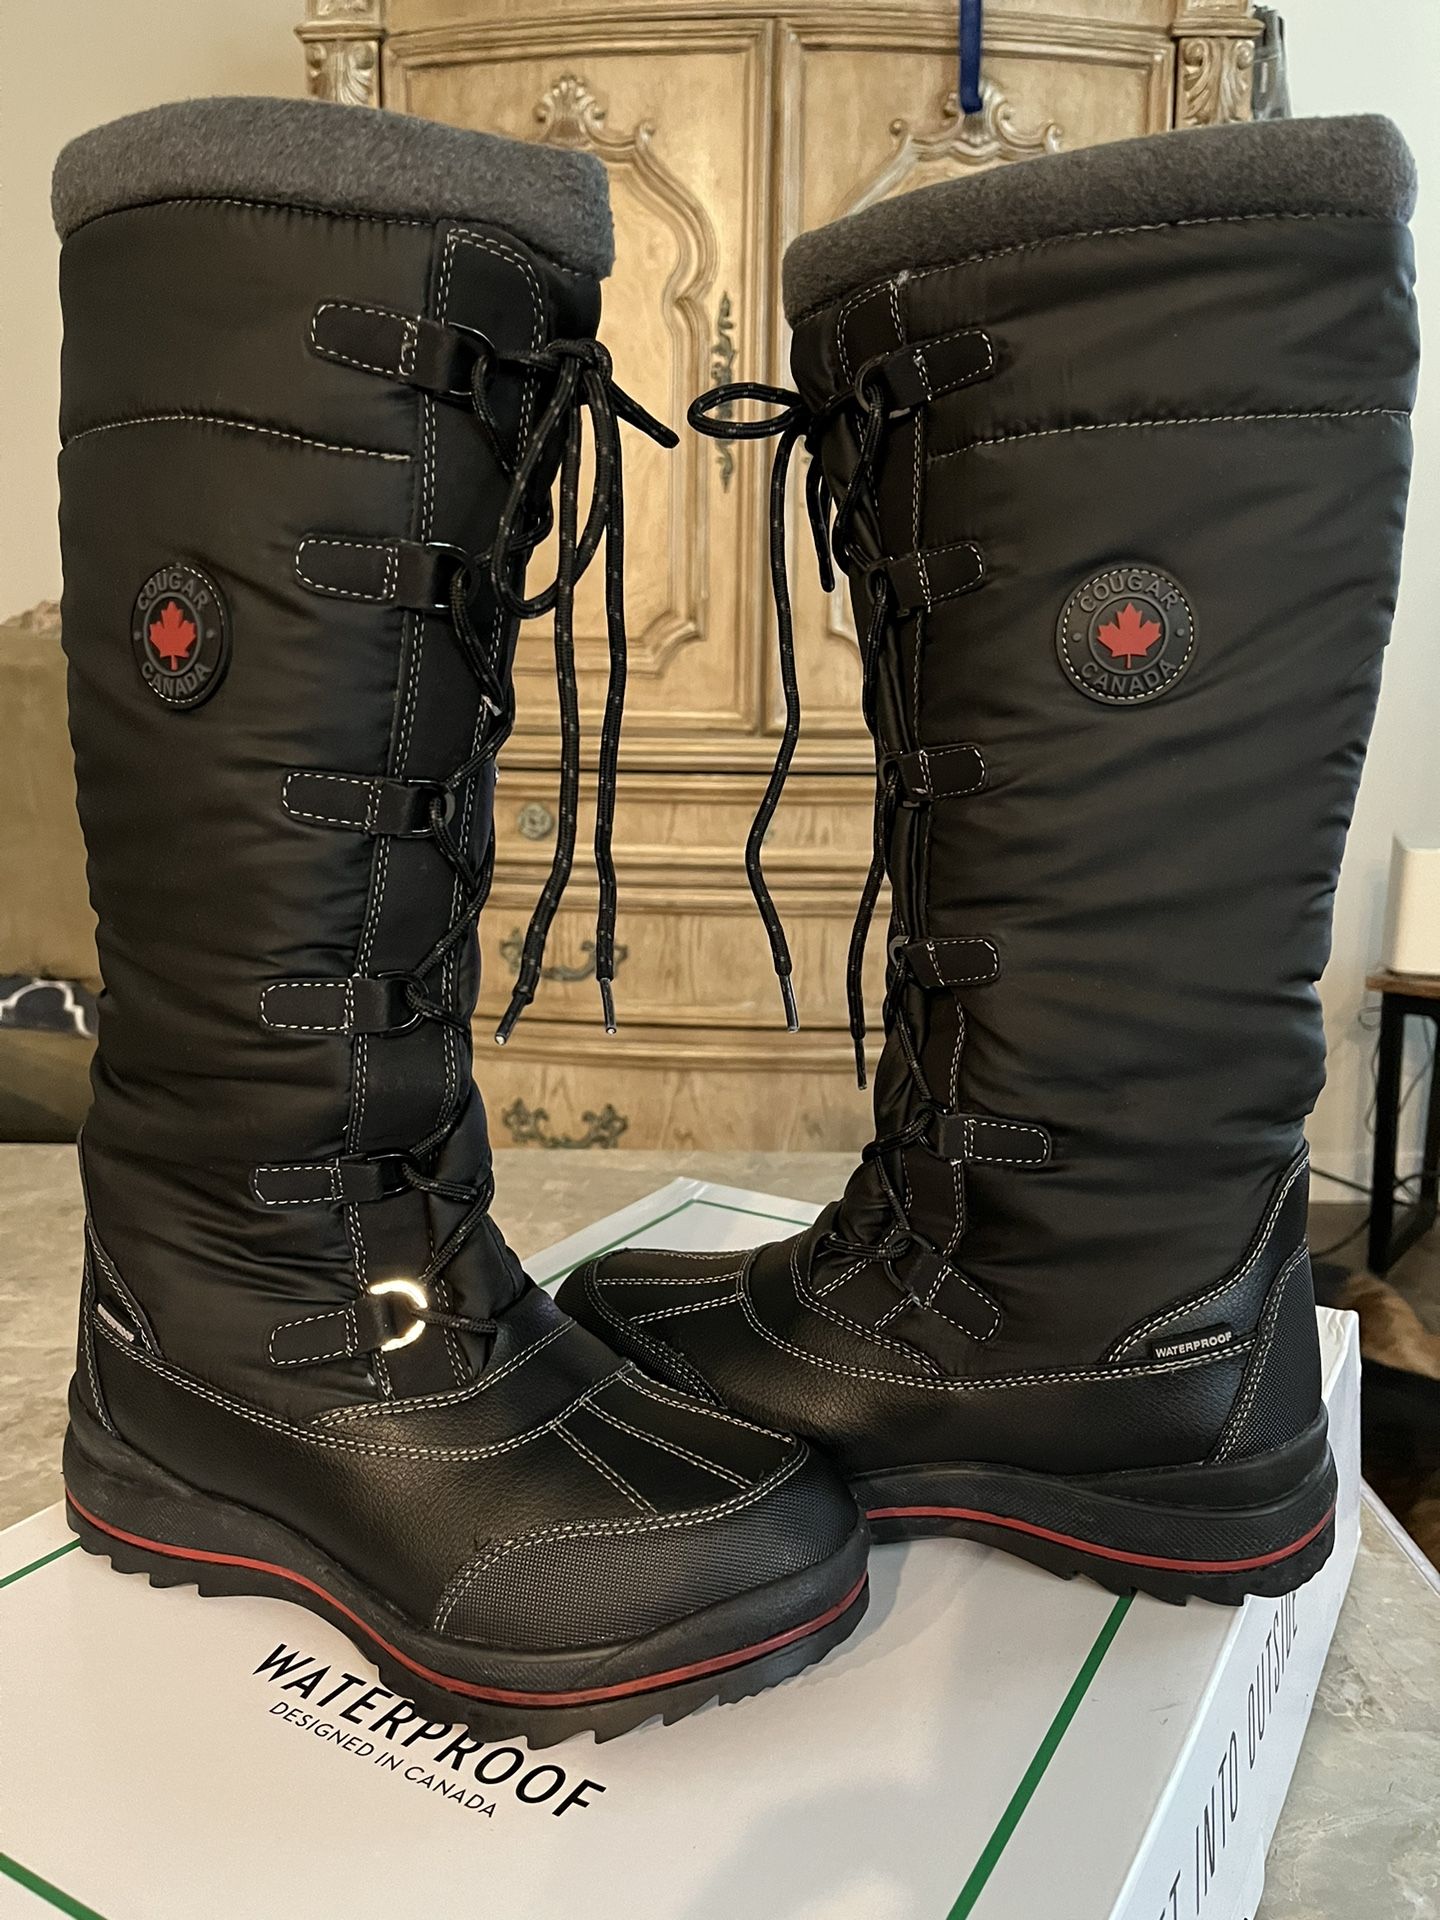 COUGAR Women’s Waterproof “Canuck” Black Snow Boots Size 8 from Canada Org. $145